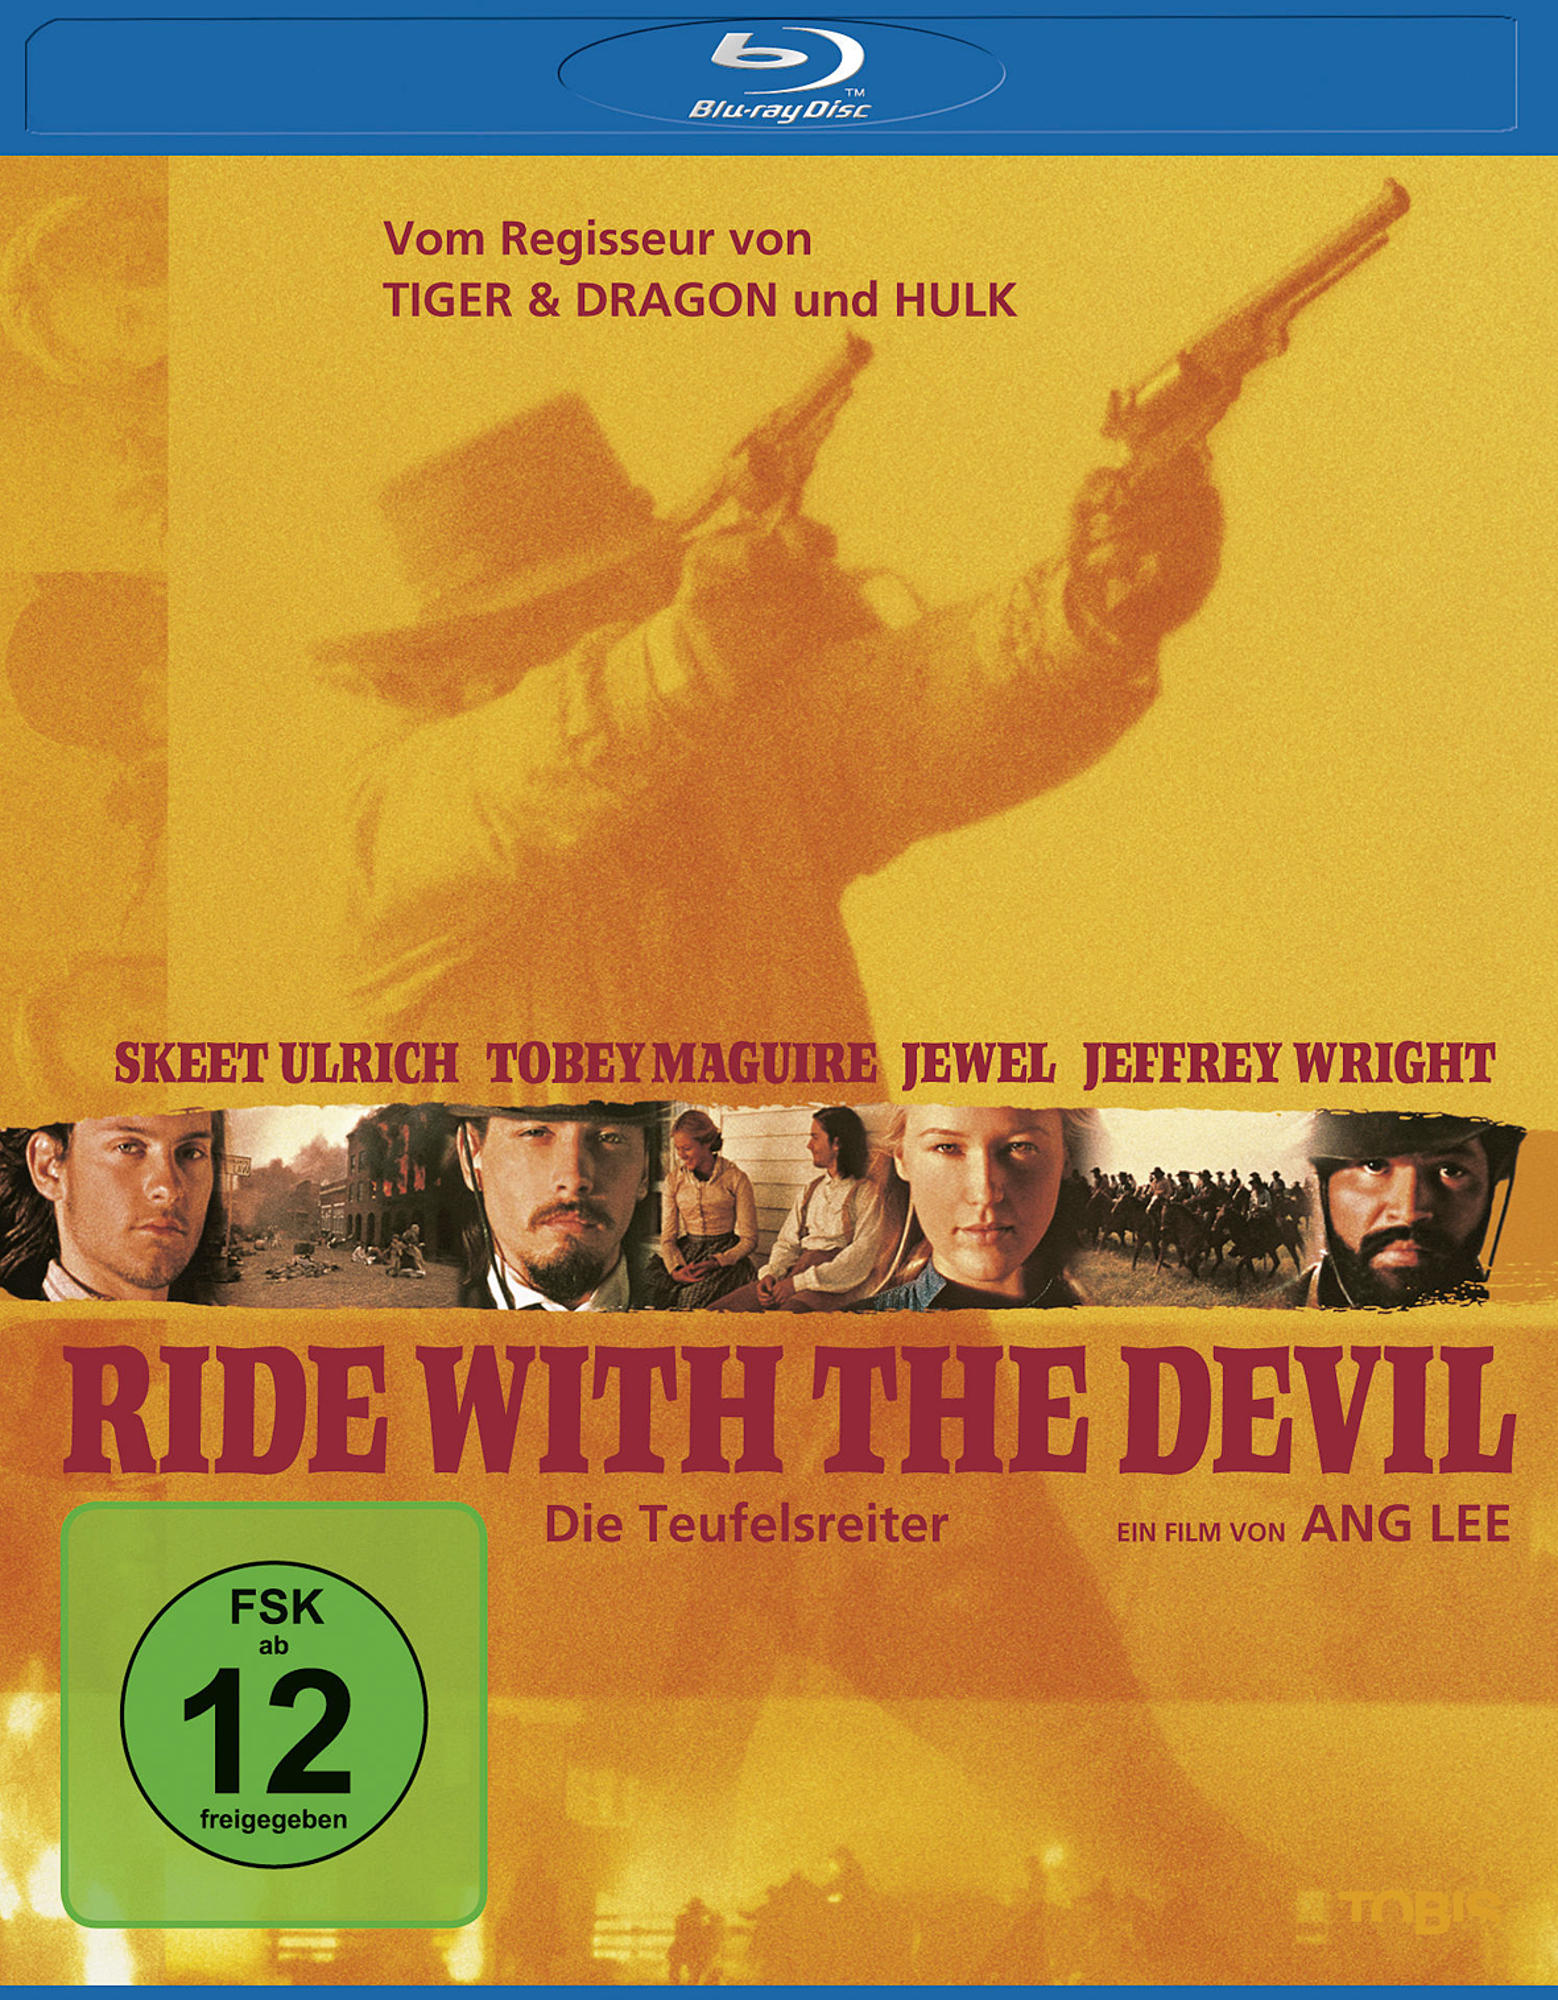 RIDE WITH THE - DEVIL Blu-ray TEUFELSREITER DIE